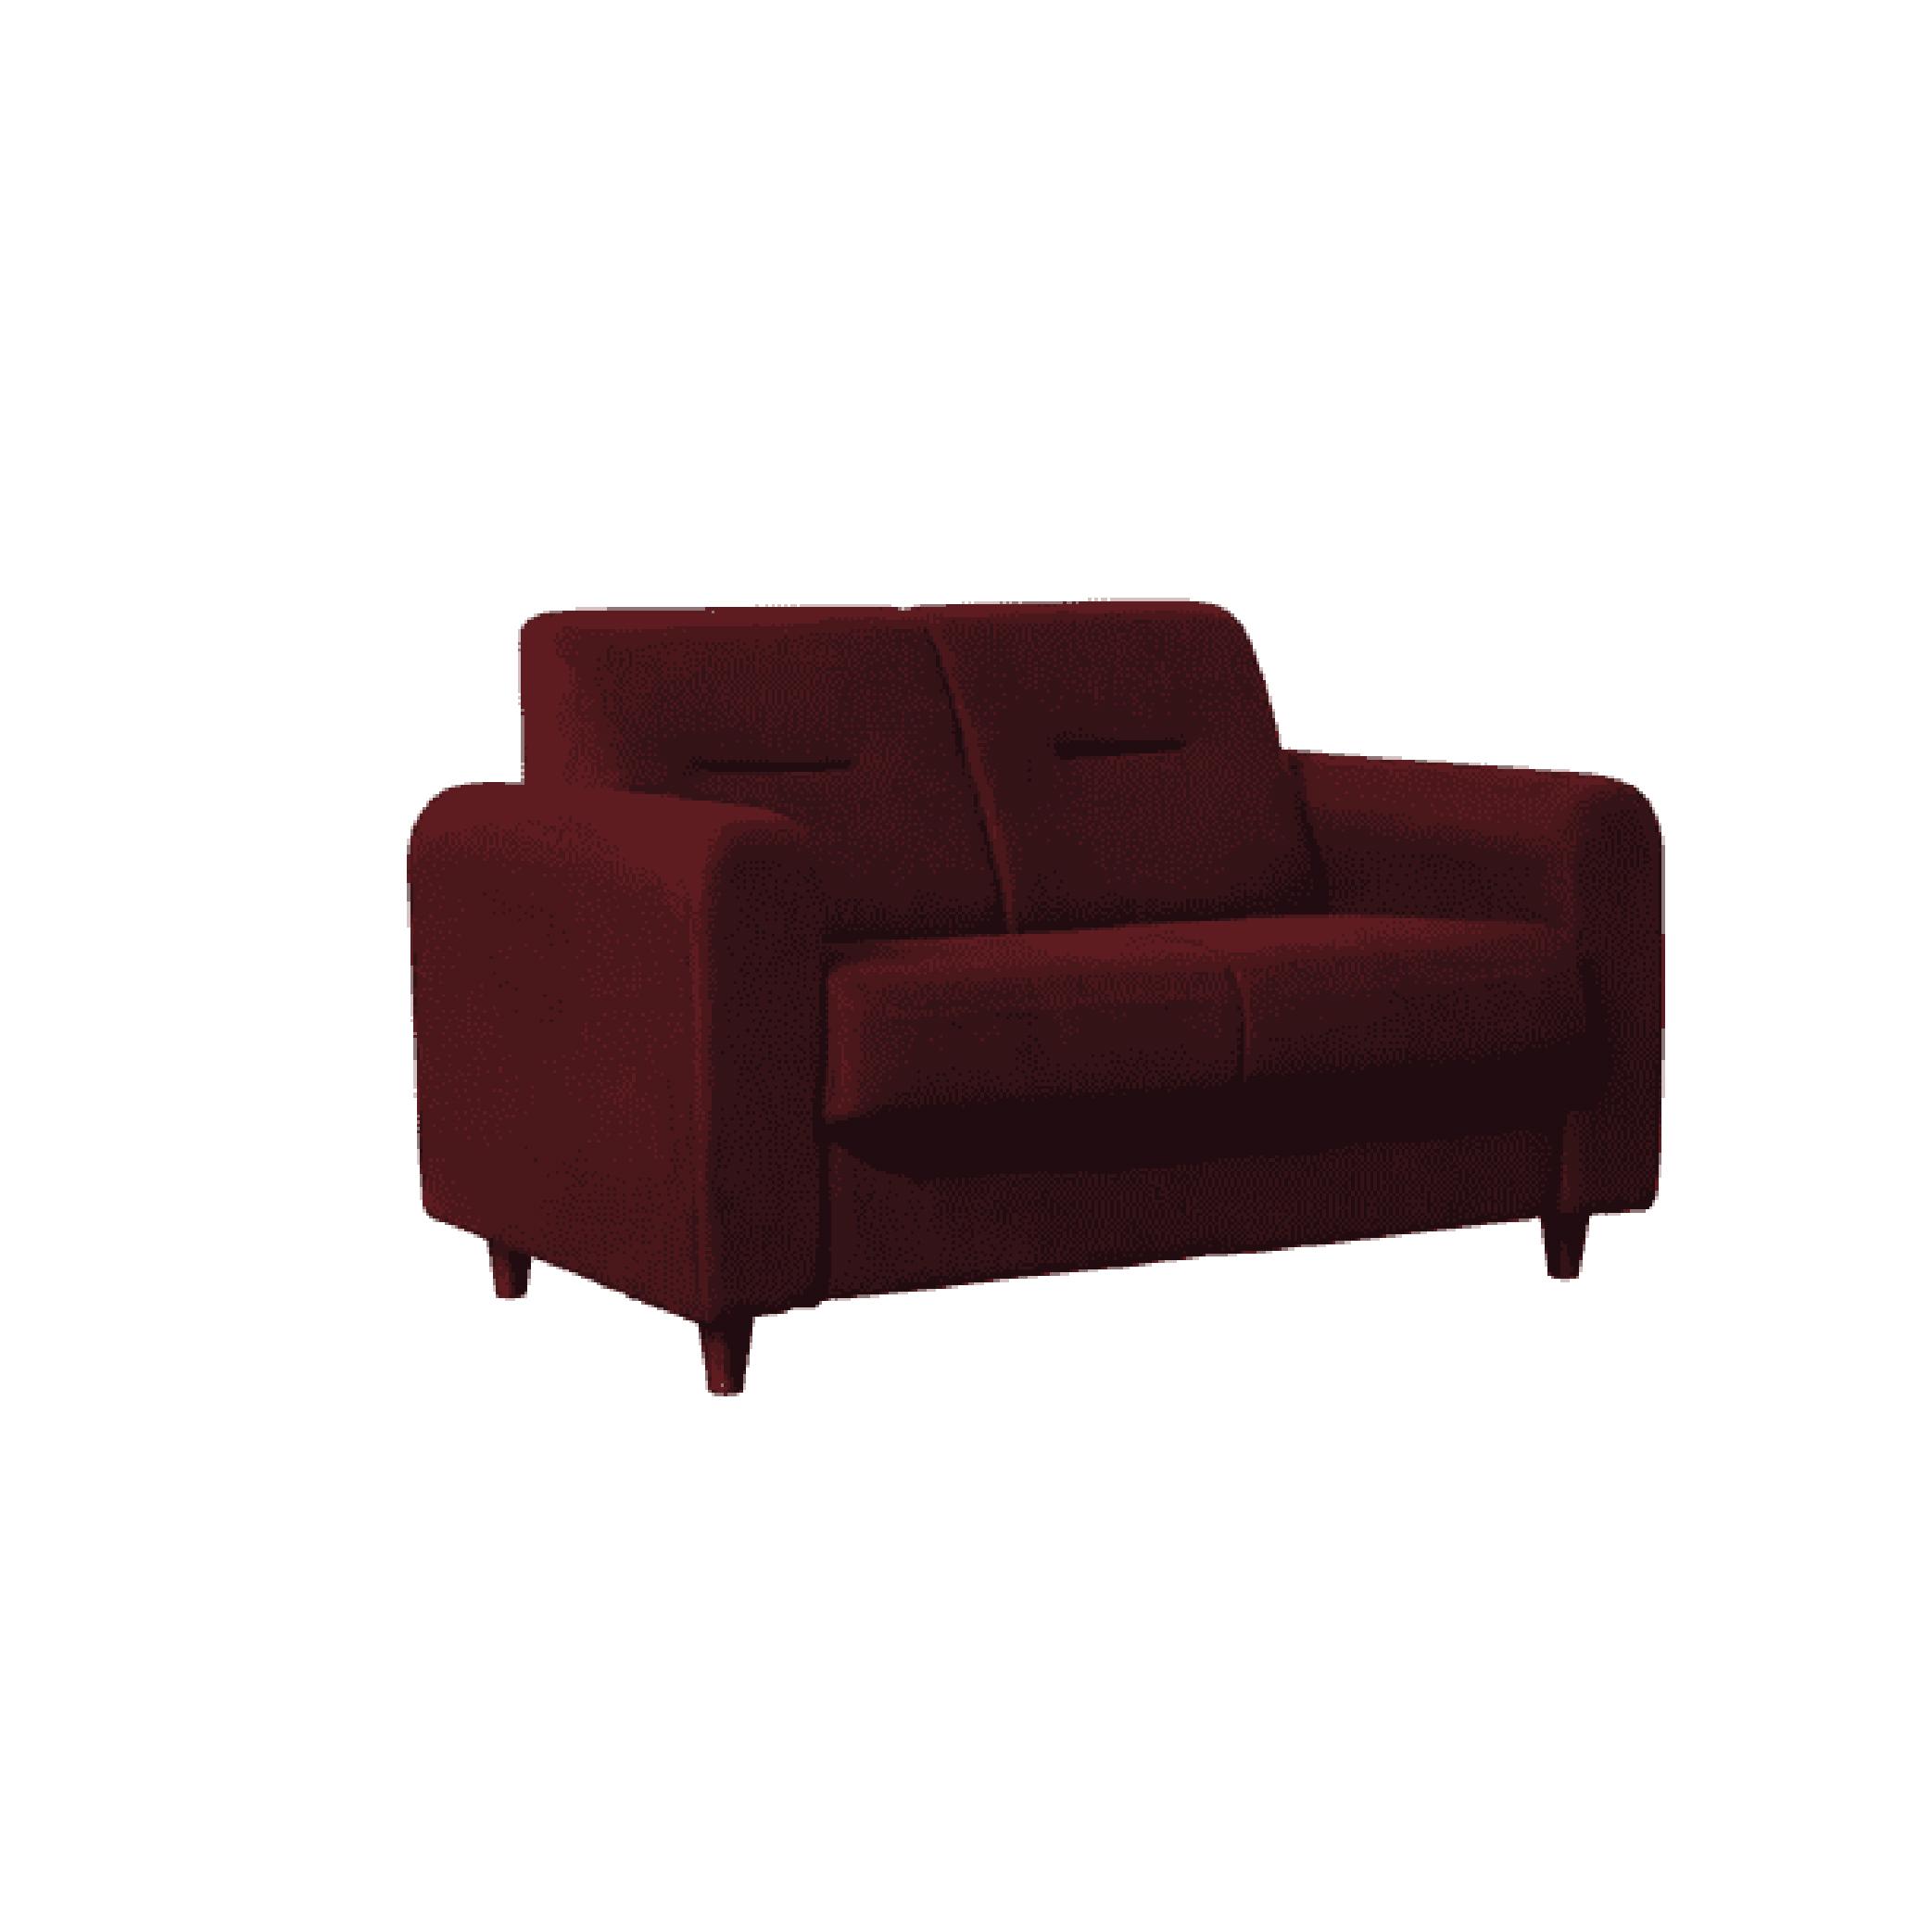 Nola Two Seater Sofa in Garnet Red Colour